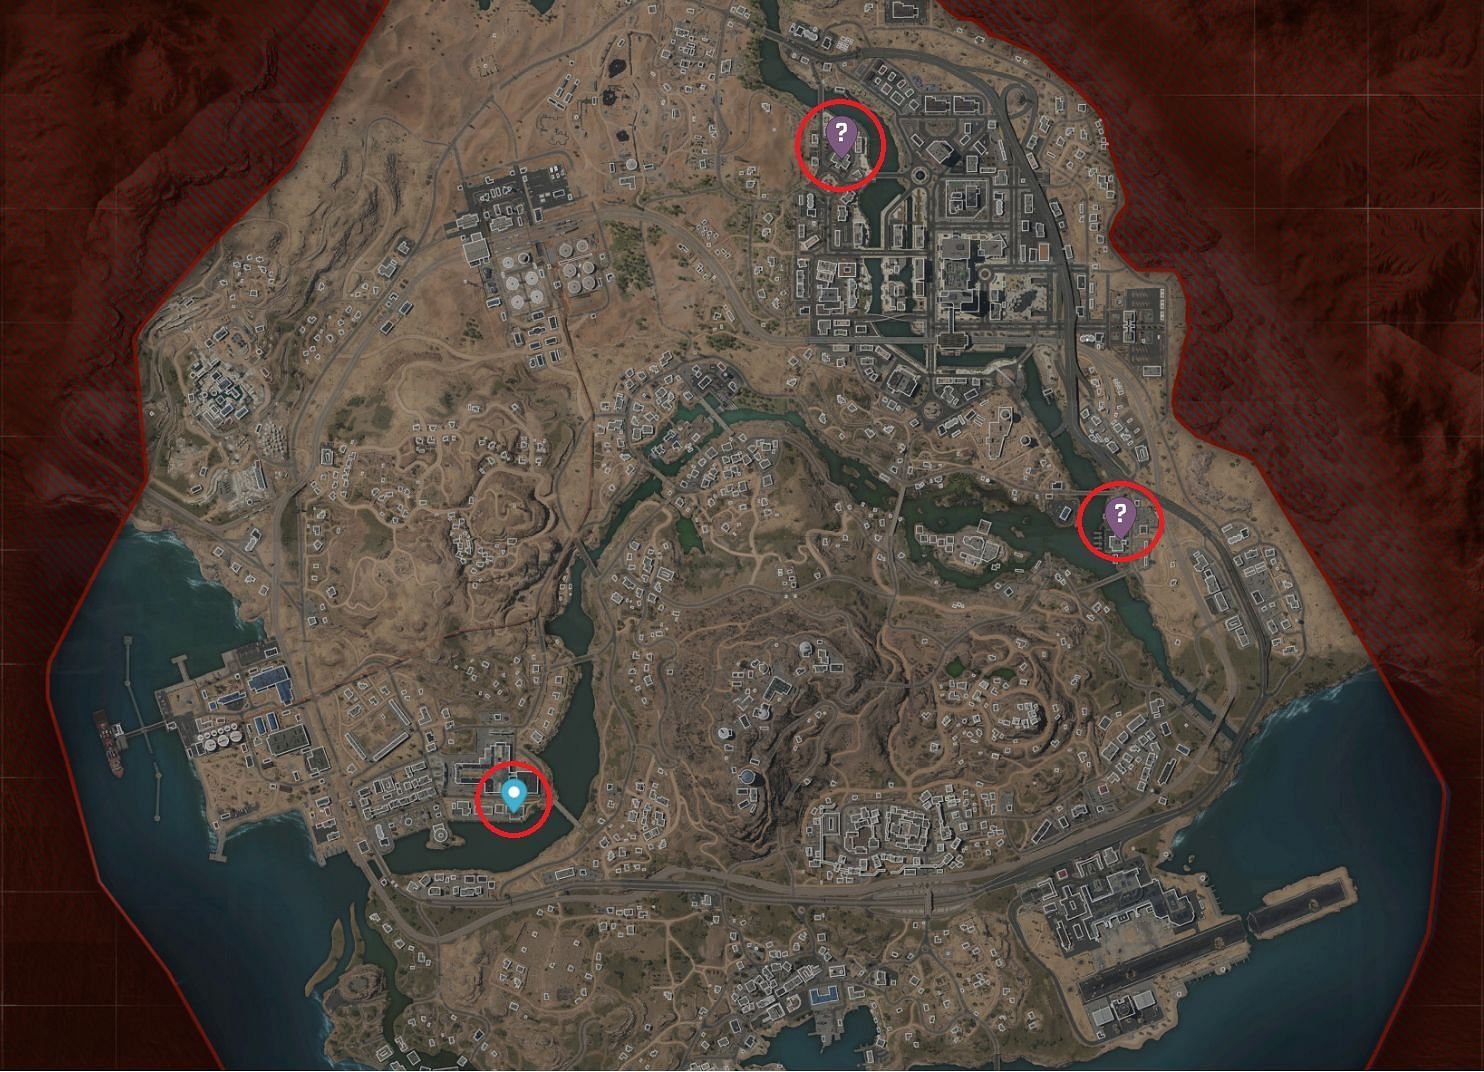 All locations of police stations in Warzone 2 DMZ's Al Mazrah (Image via Activision)